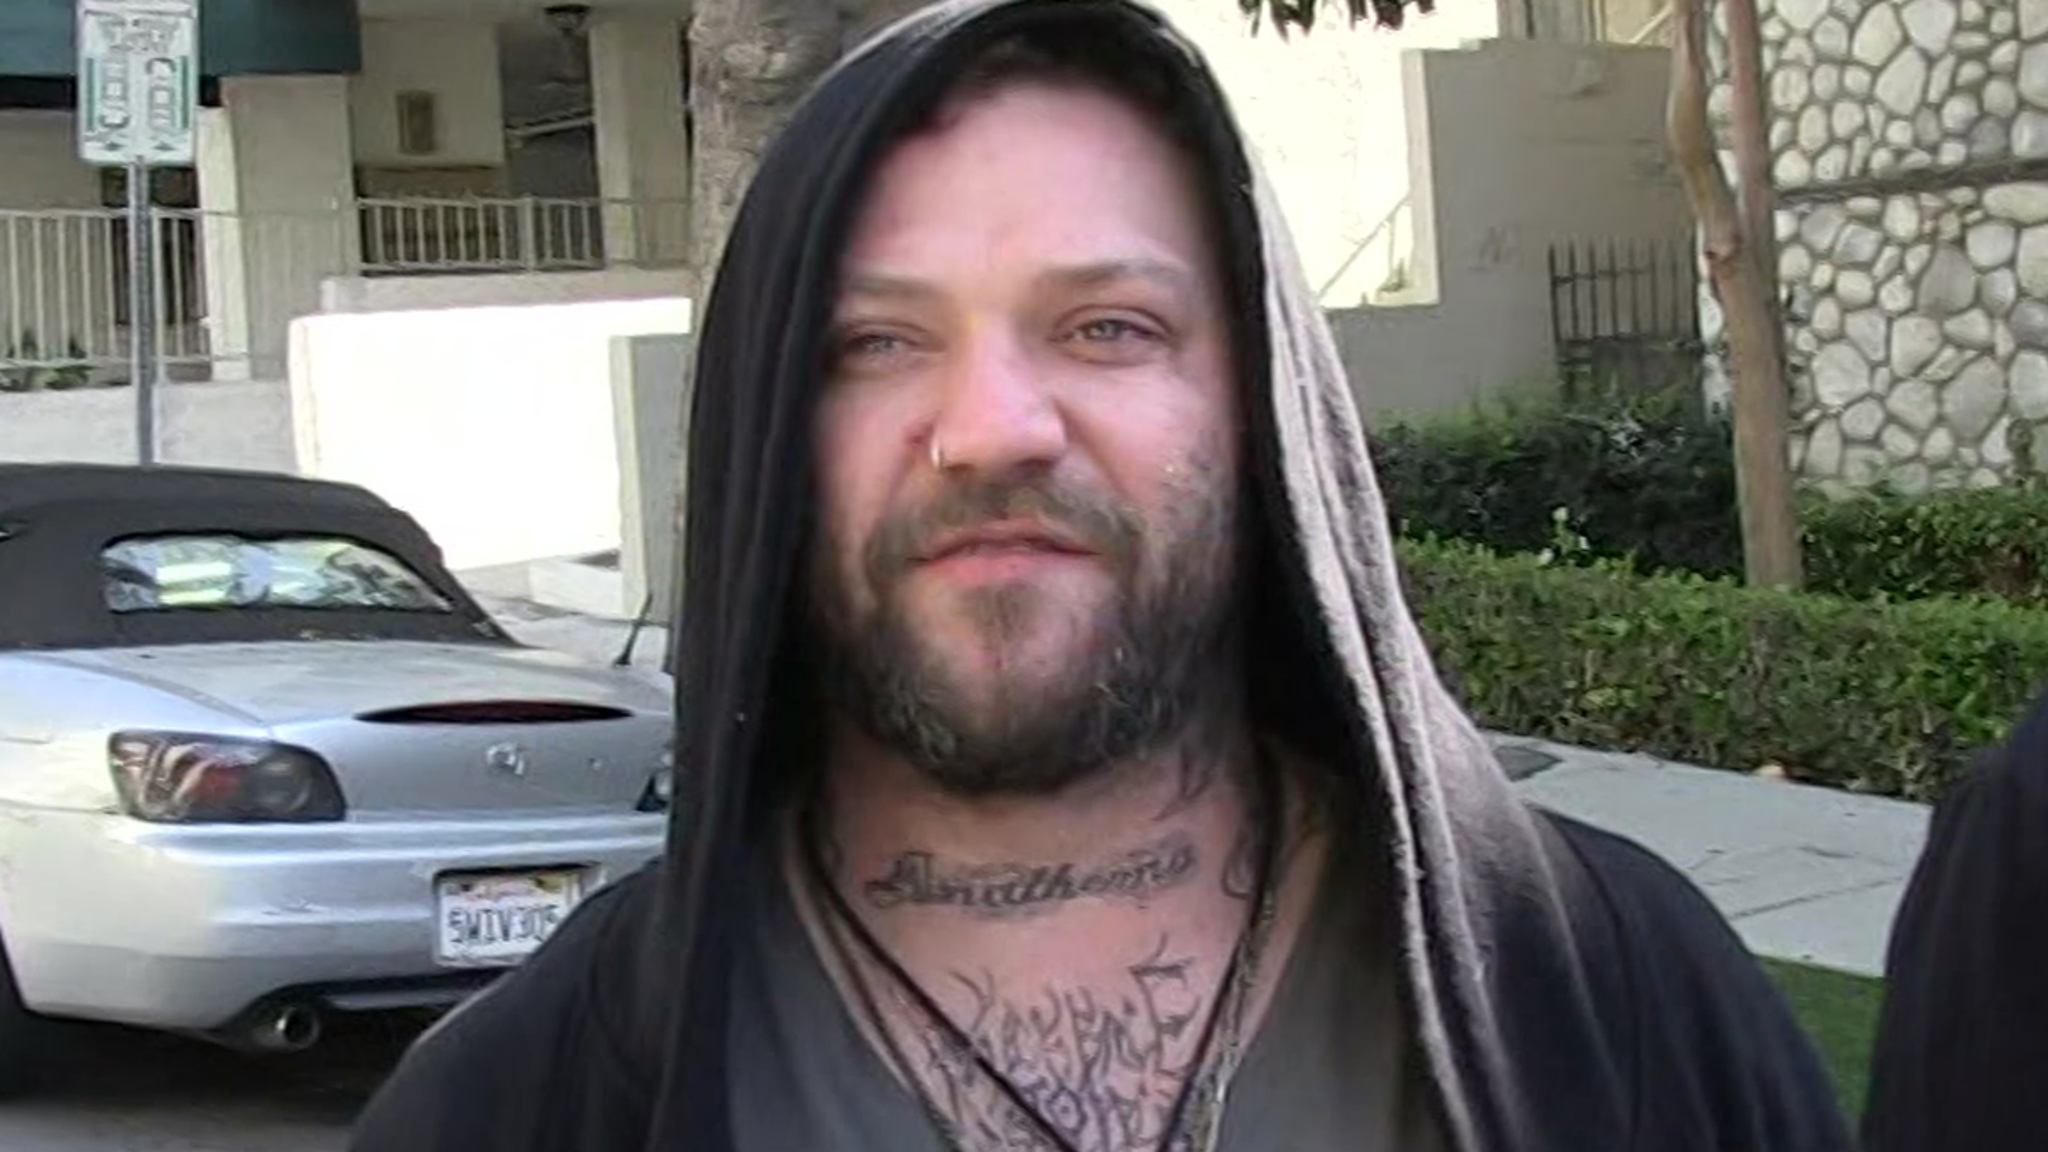 Bam Margera Tells Family Members He Hates Them in Disturbing Calls on the Run